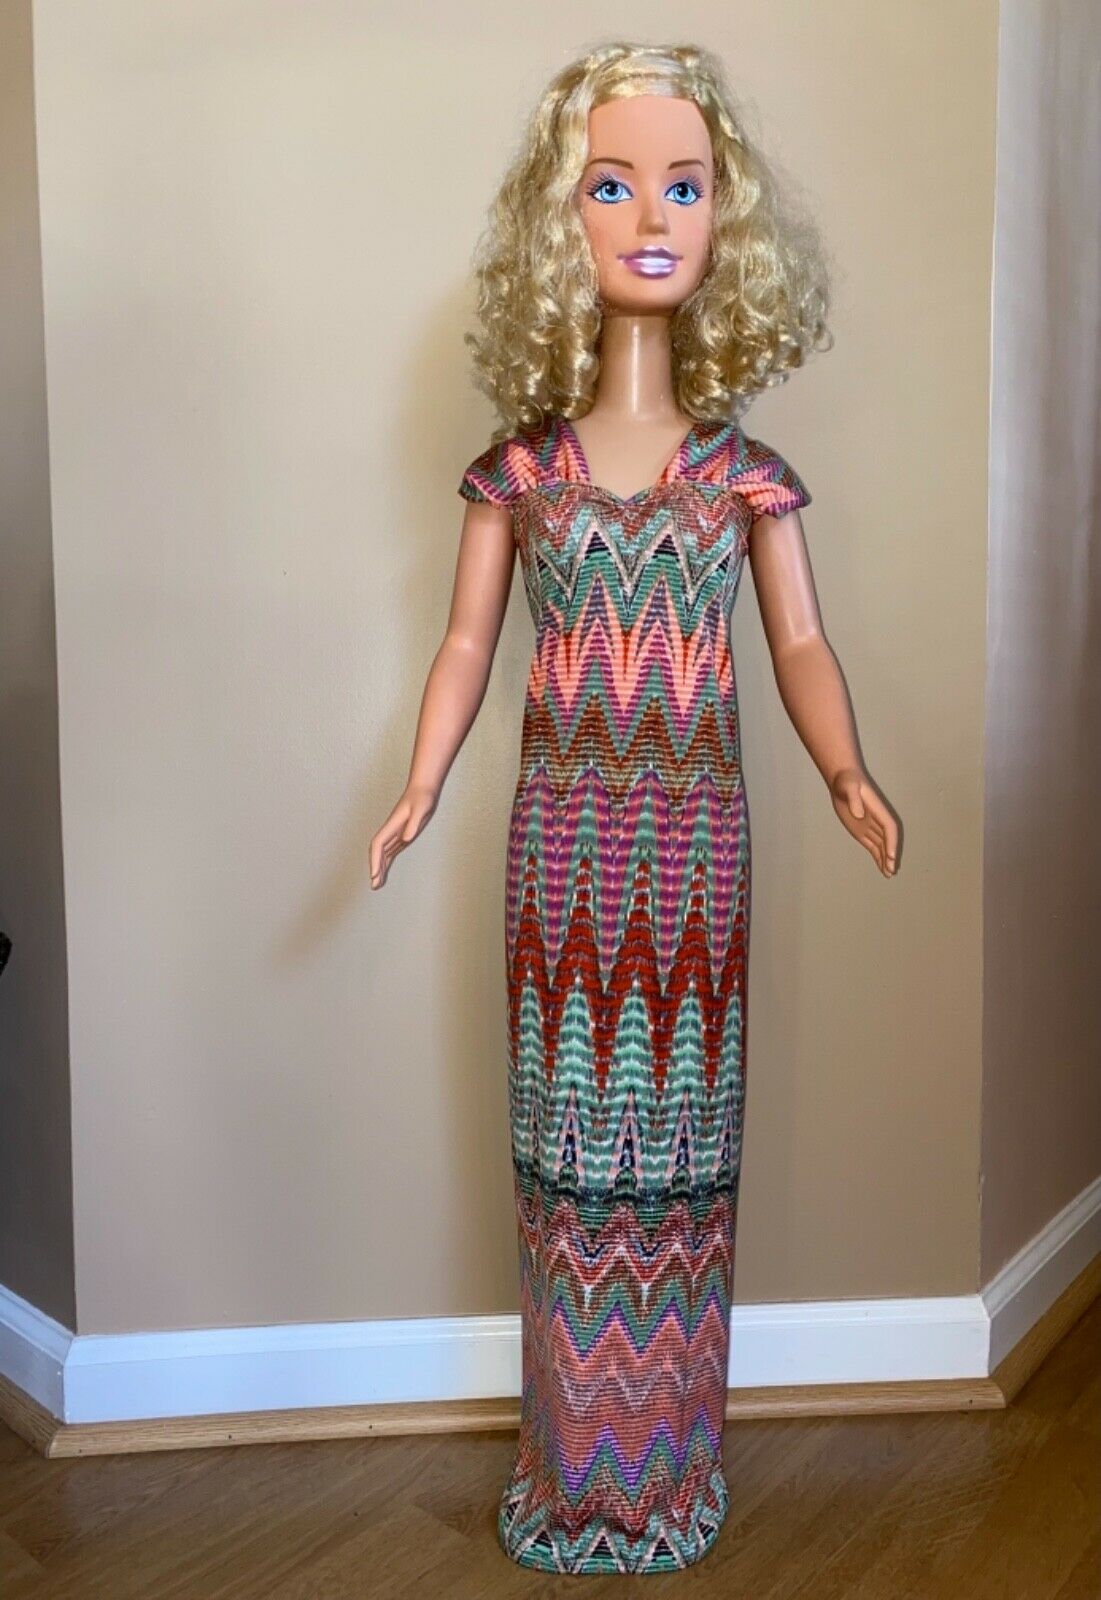 My Size Barbie Clothes - 36 Inch- Full Length Colorful Evening Gown